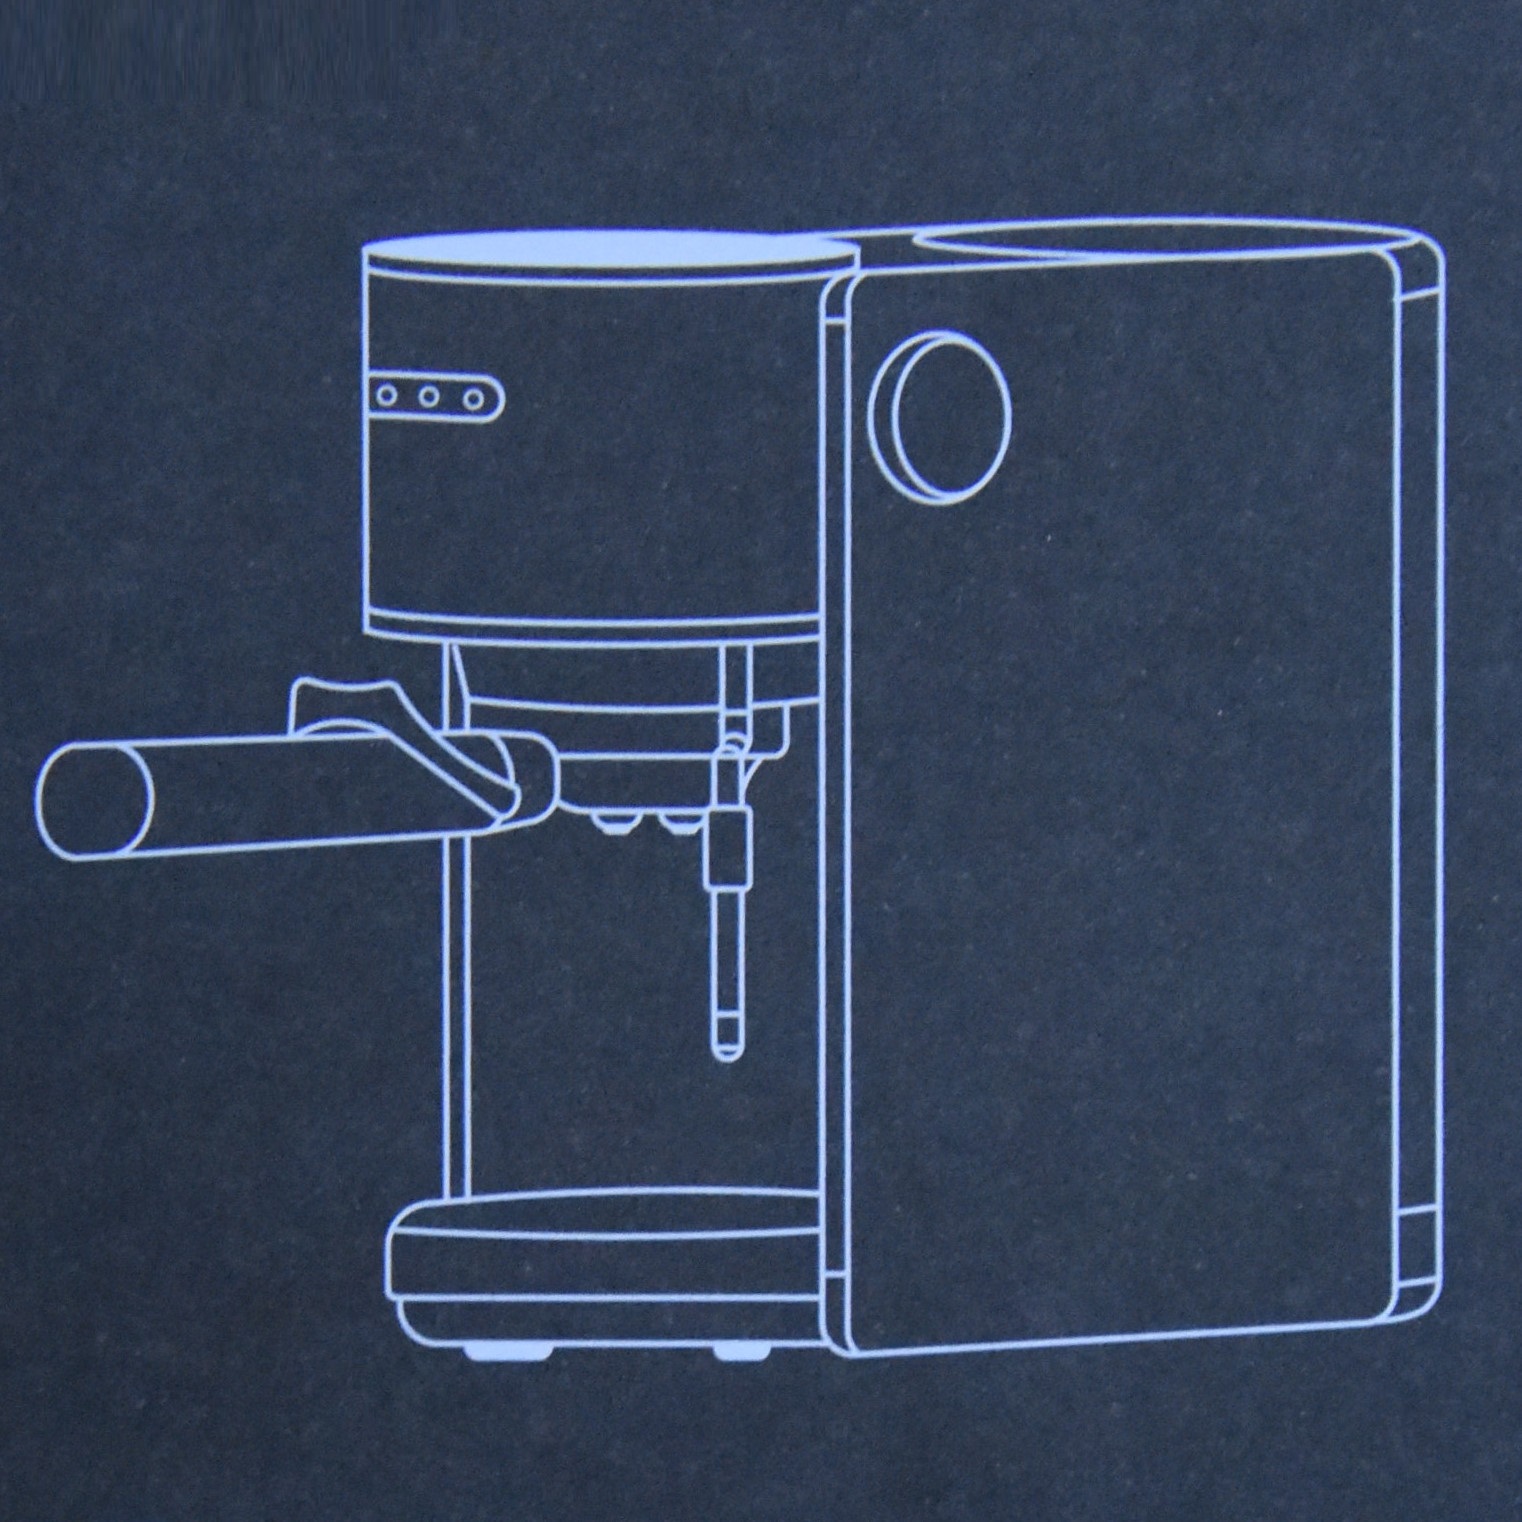 A line drawing of the Coffee Gator Espresso Machine, taken from the front of the instruction manual.